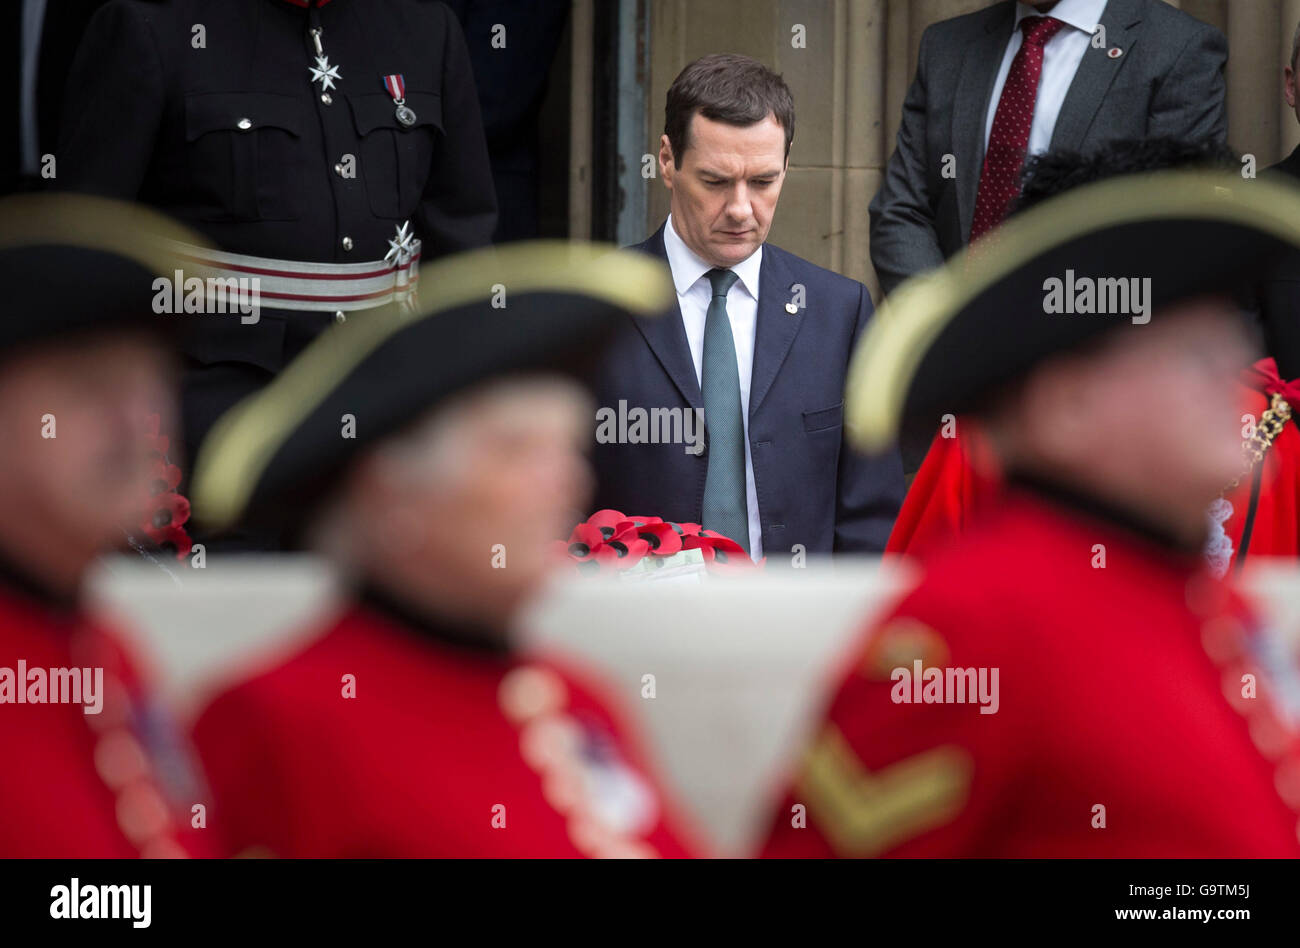 Chancellor George Osborne prepares to lay a wealth at the Cenotaph in St Peter's Square, Manchester, where a commemoration is being held to mark the 100th anniversary of the start of the battle of the Somme. Stock Photo